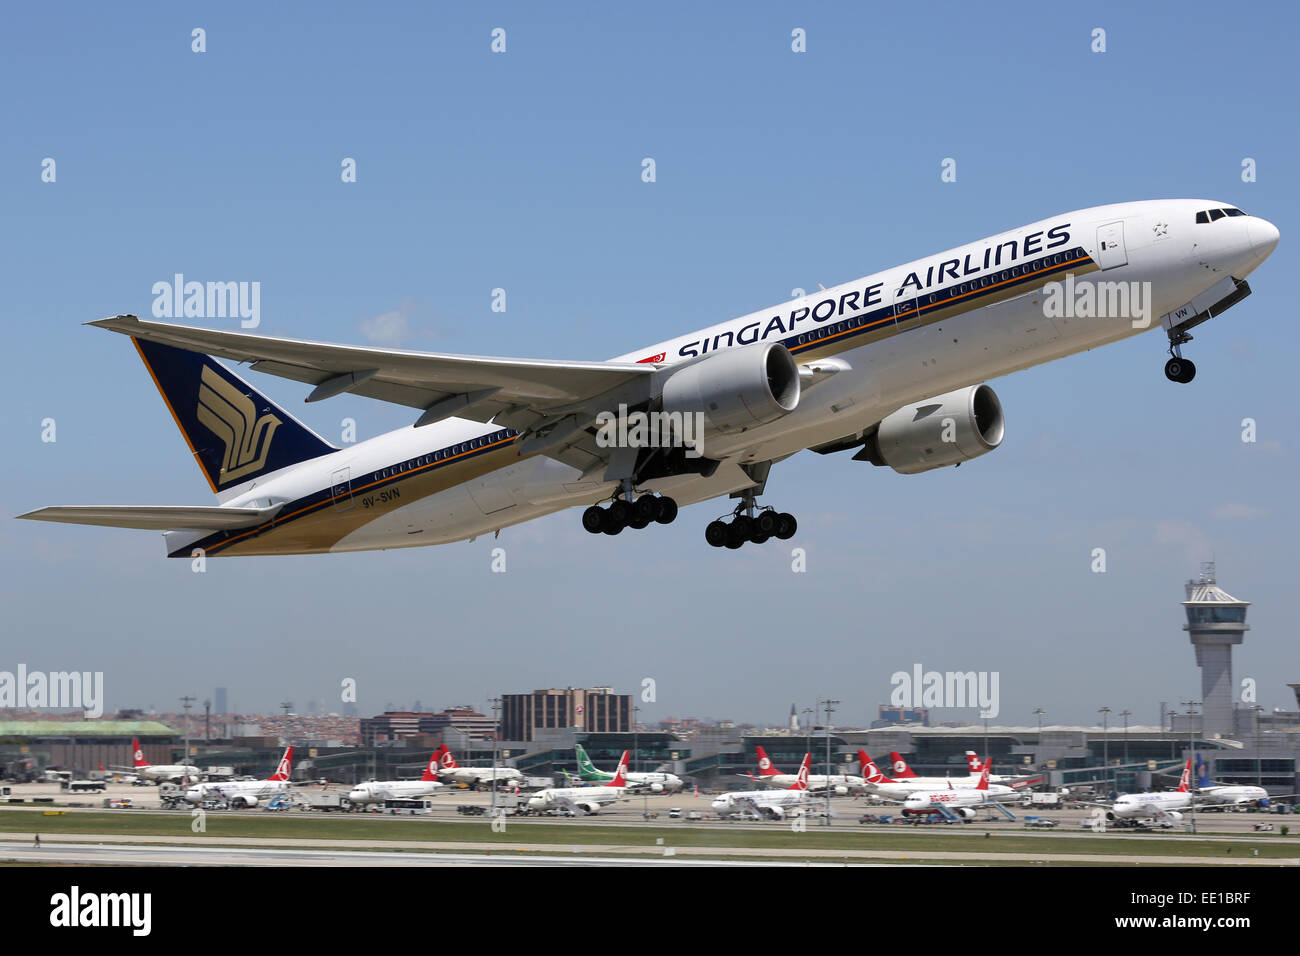 Istanbul, Turkey - May 15, 2014: A Singapore Airlines Boeing 777-200 with the registration 9V-SVN takes off from Istanbul Intern Stock Photo